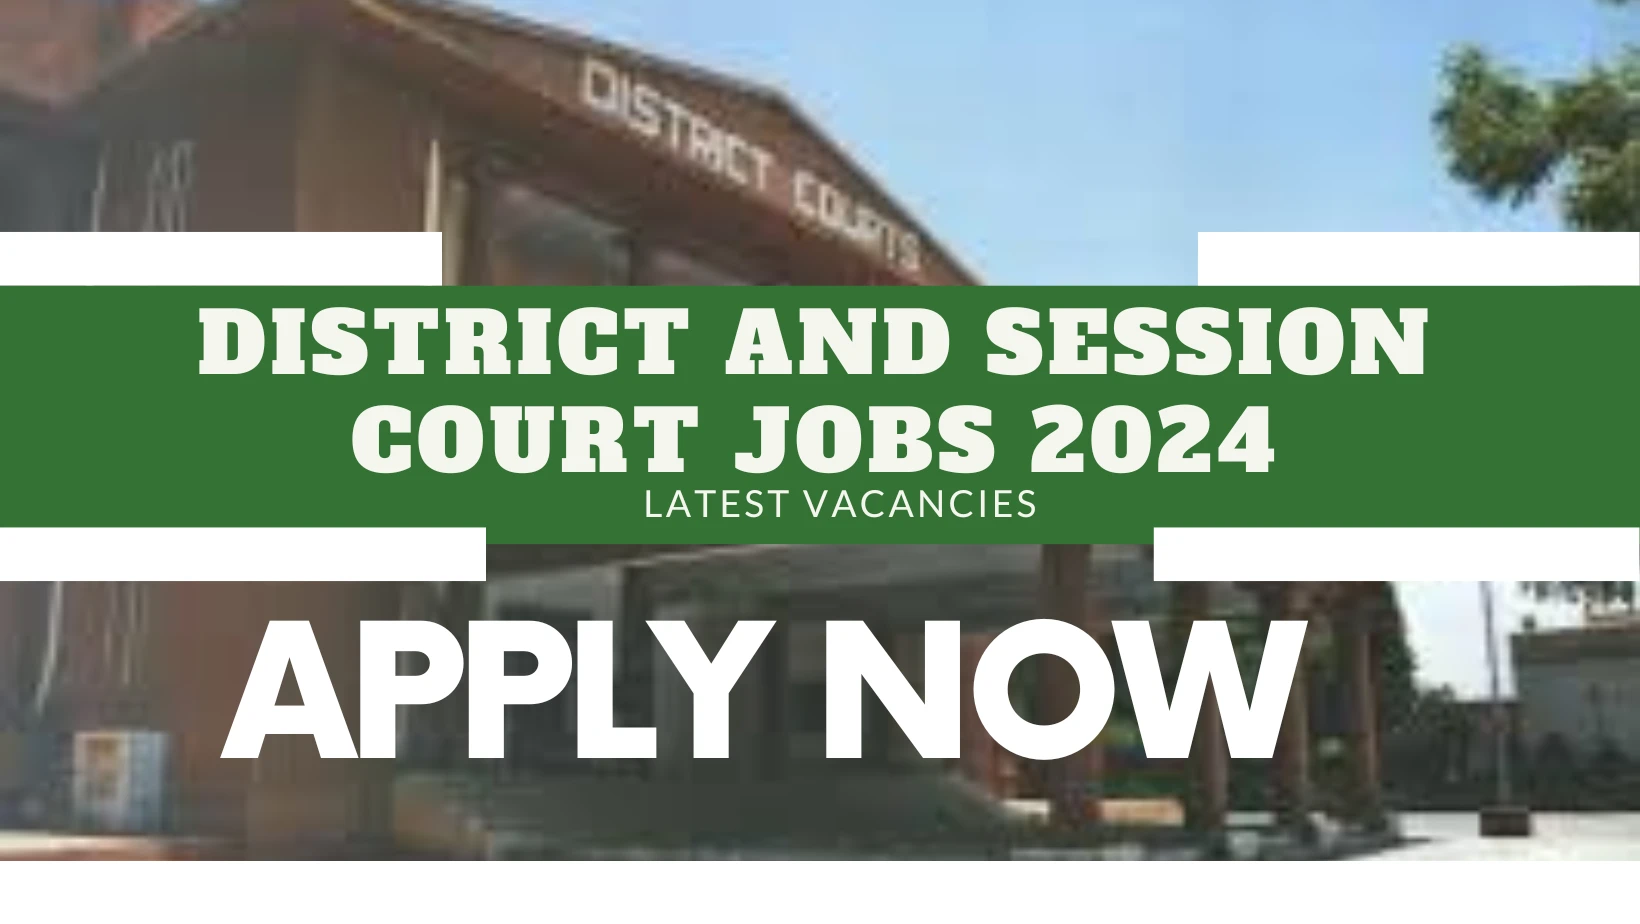 DISTRICT AND SESSION COURT JOBS 2024